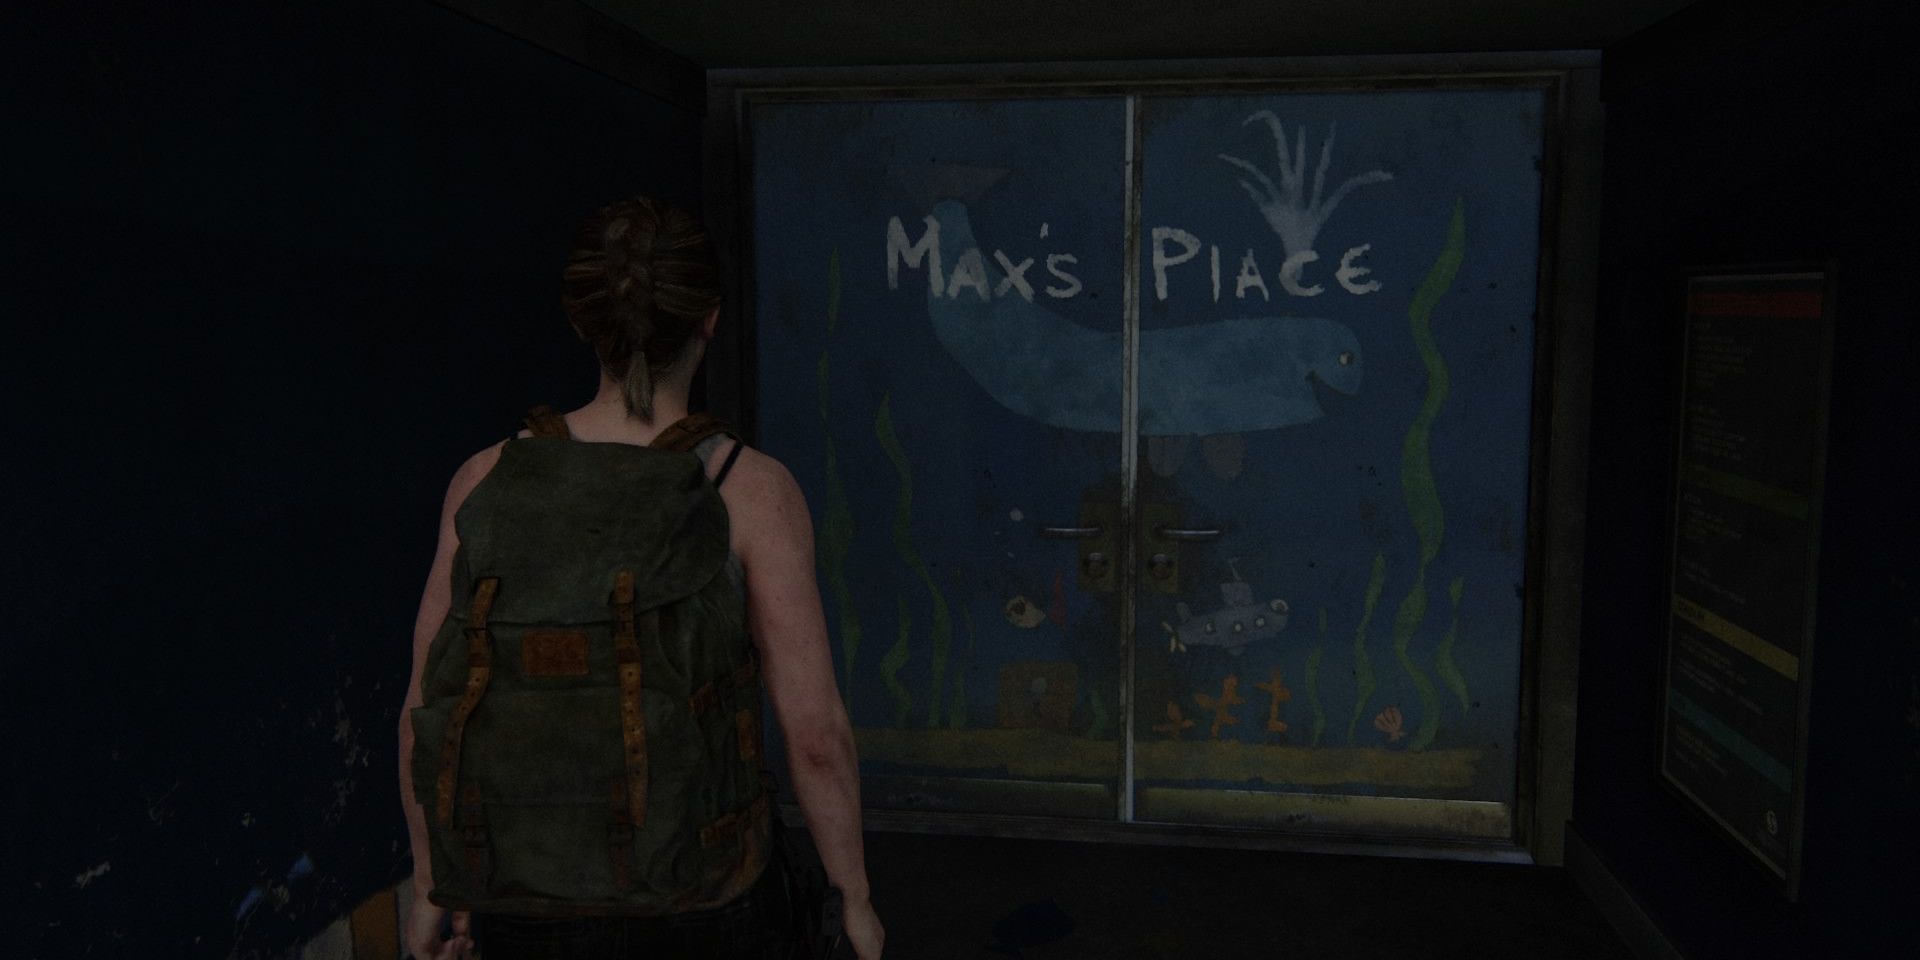 The Last of Us' — Important Plot Details in Preparation for the